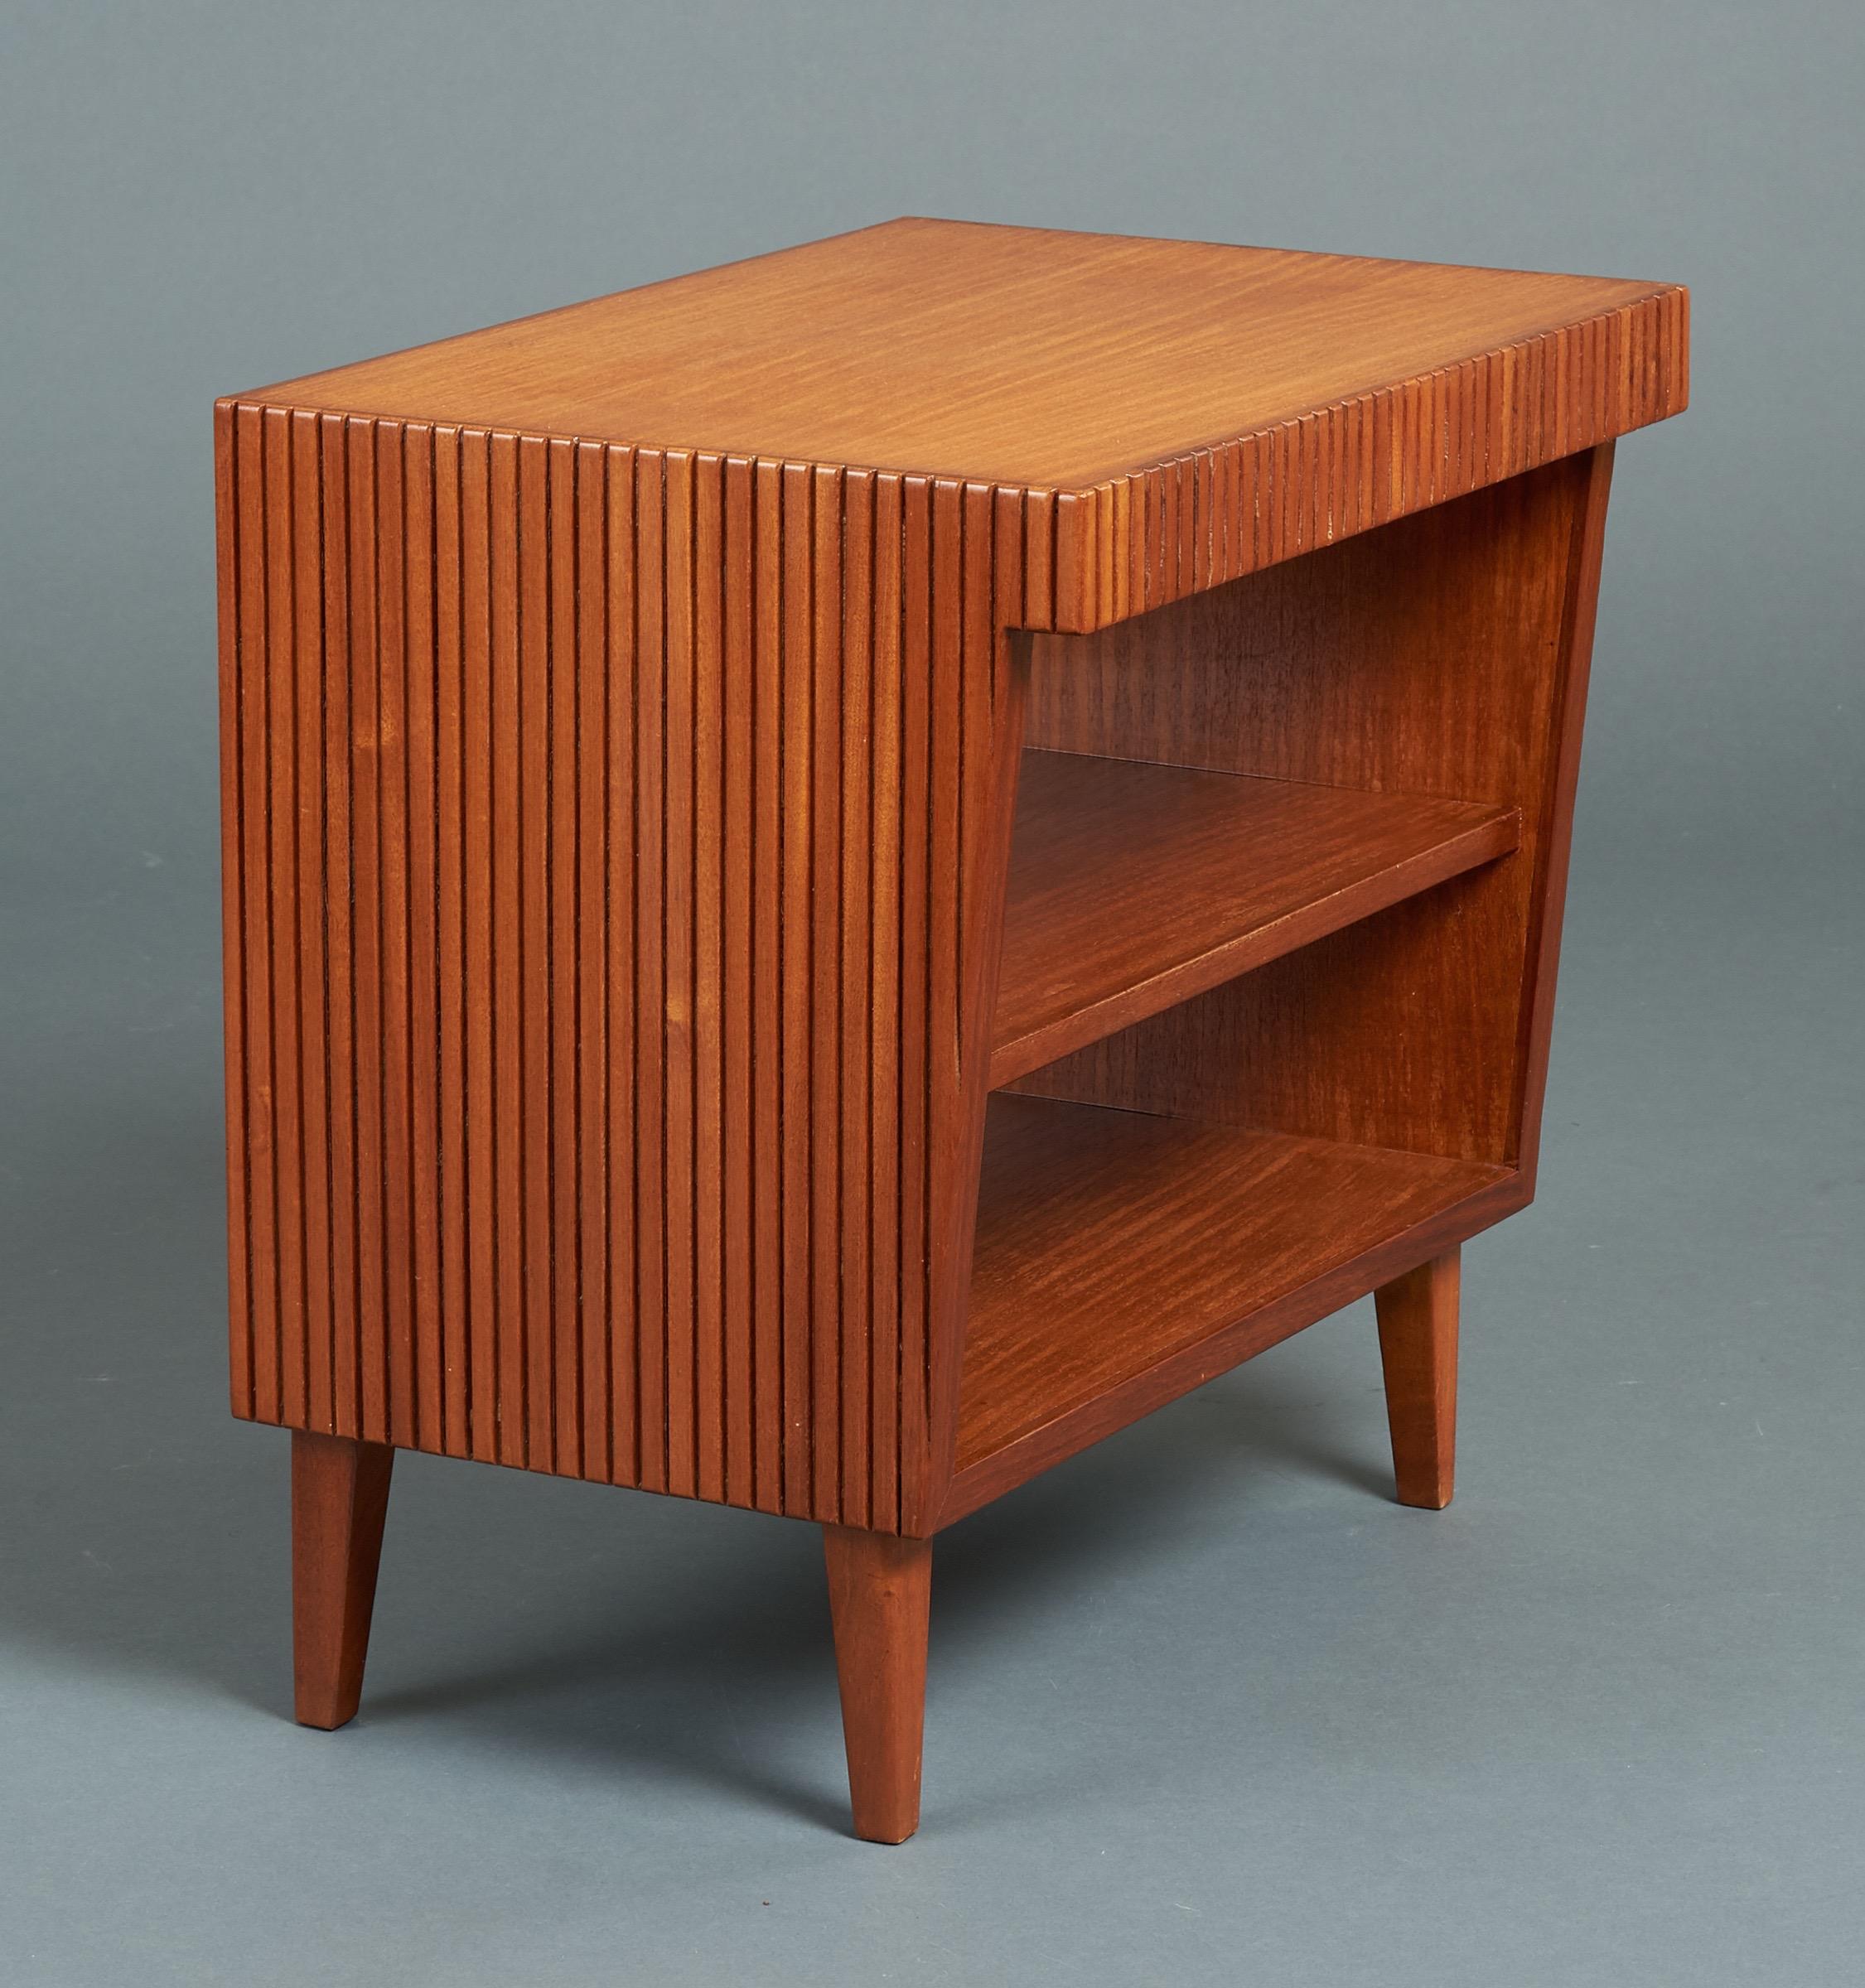 Gio Ponti (1891-1979)

A geometric side table, nightstand, or small bookcase in reeded mahogany by Gio Ponti. With two bookshelves, an asymmetrical stepped shape, and grooved carving of rich, variegated coloration, a distinct decorative feature